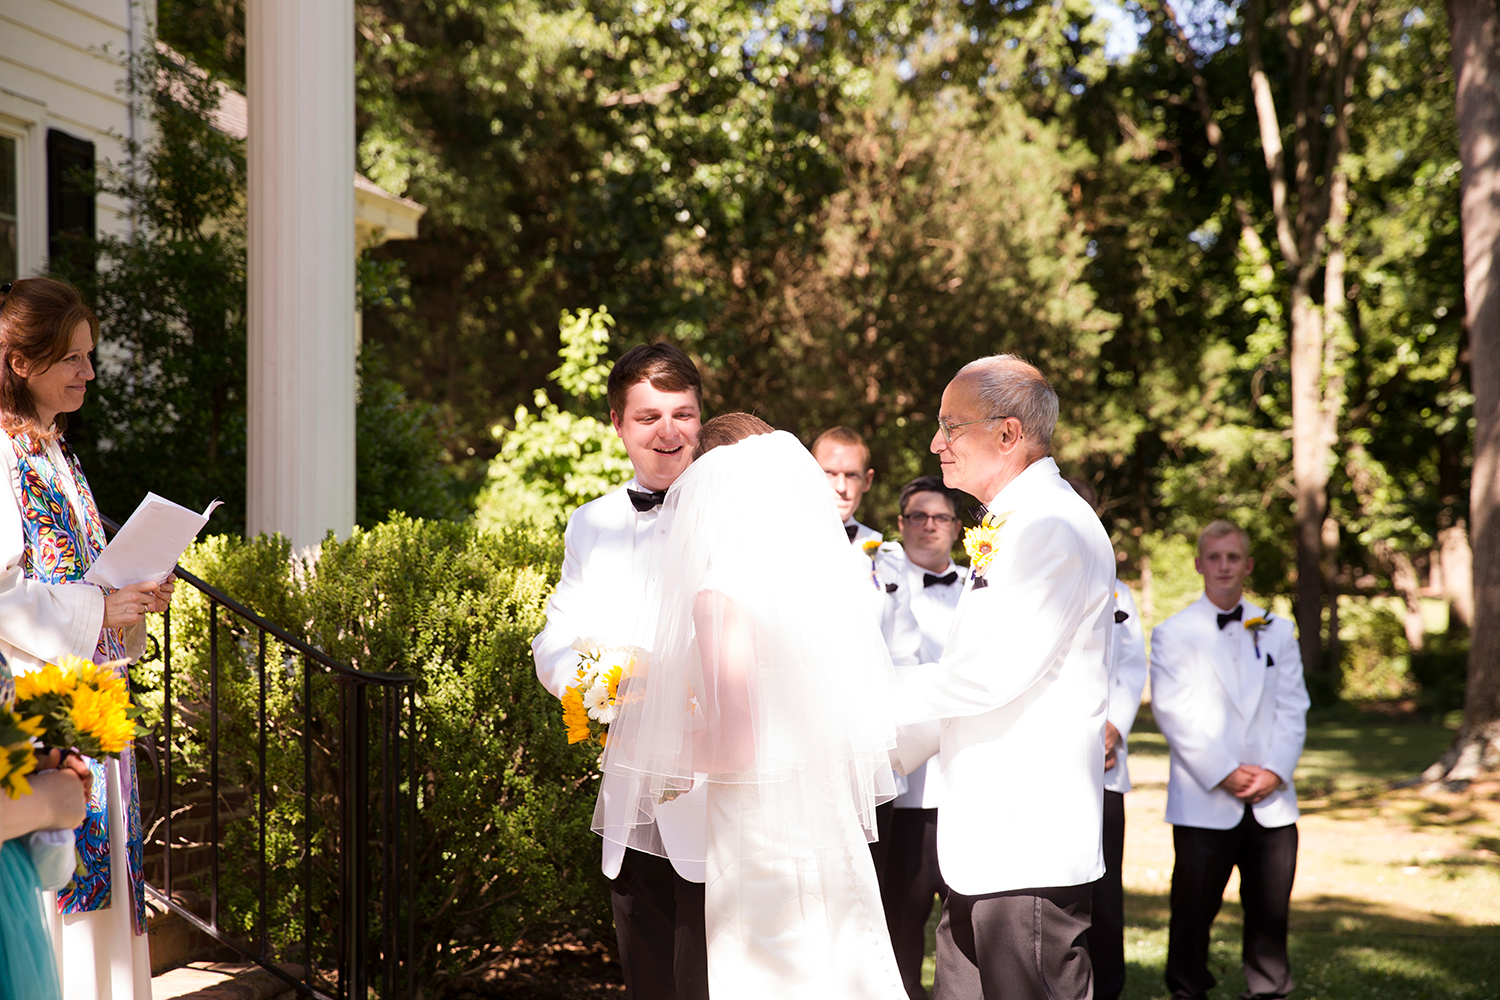 Summer Wedding at The Virginia Cliffe Inn - Image Property of www.j-dphoto.com